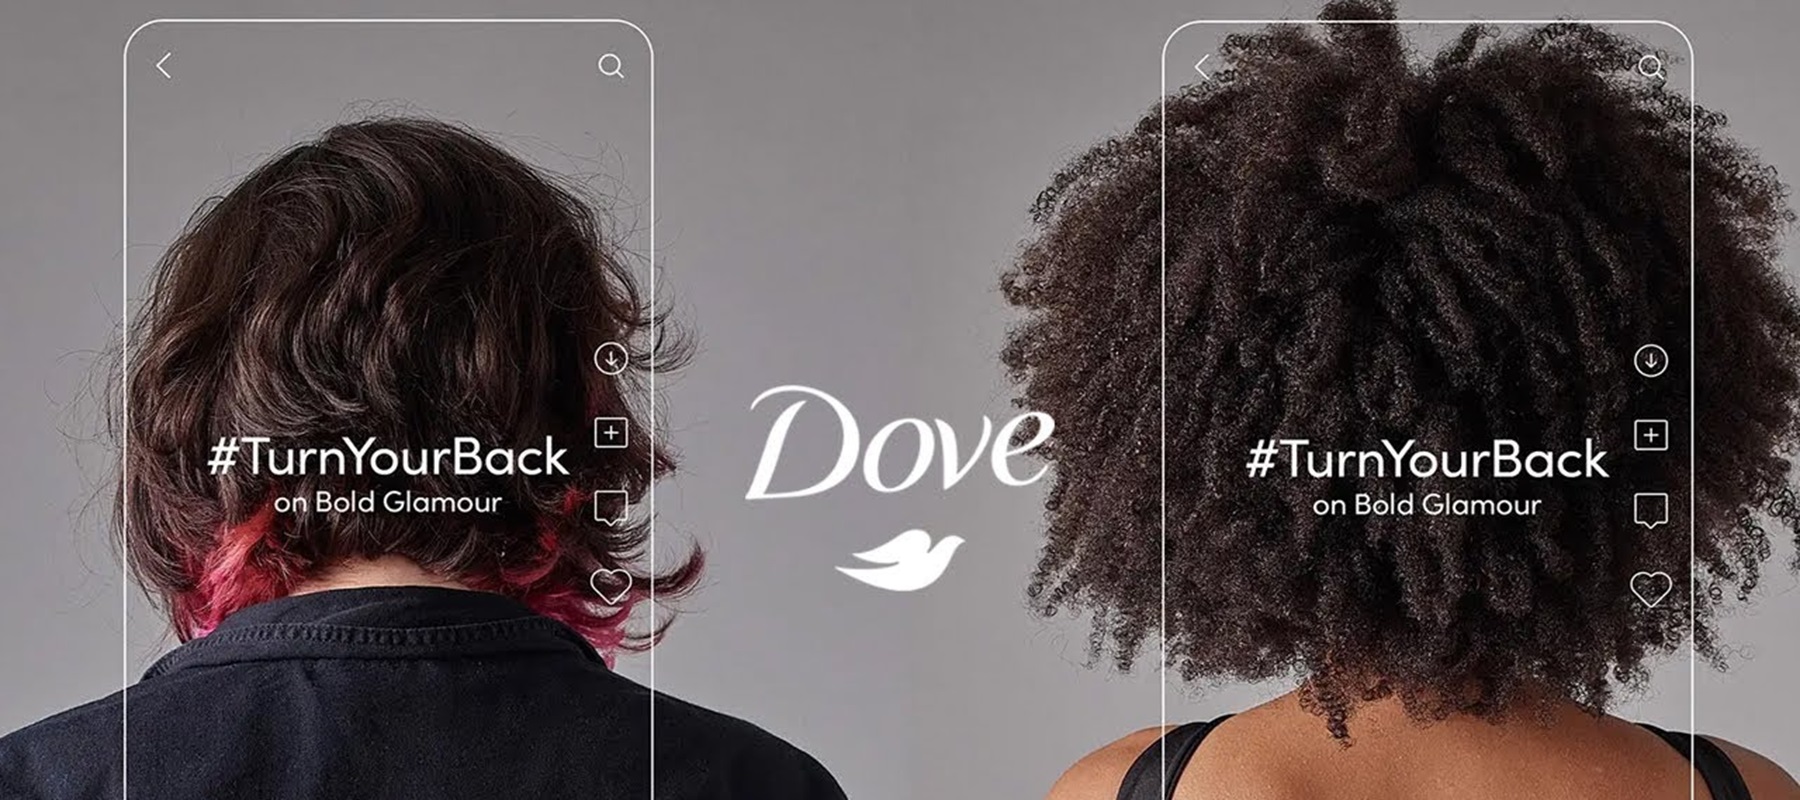 Ogilvy wins gold lion in creative effectiveness for Dove’s '#TurnYourBack' campaign at Cannes